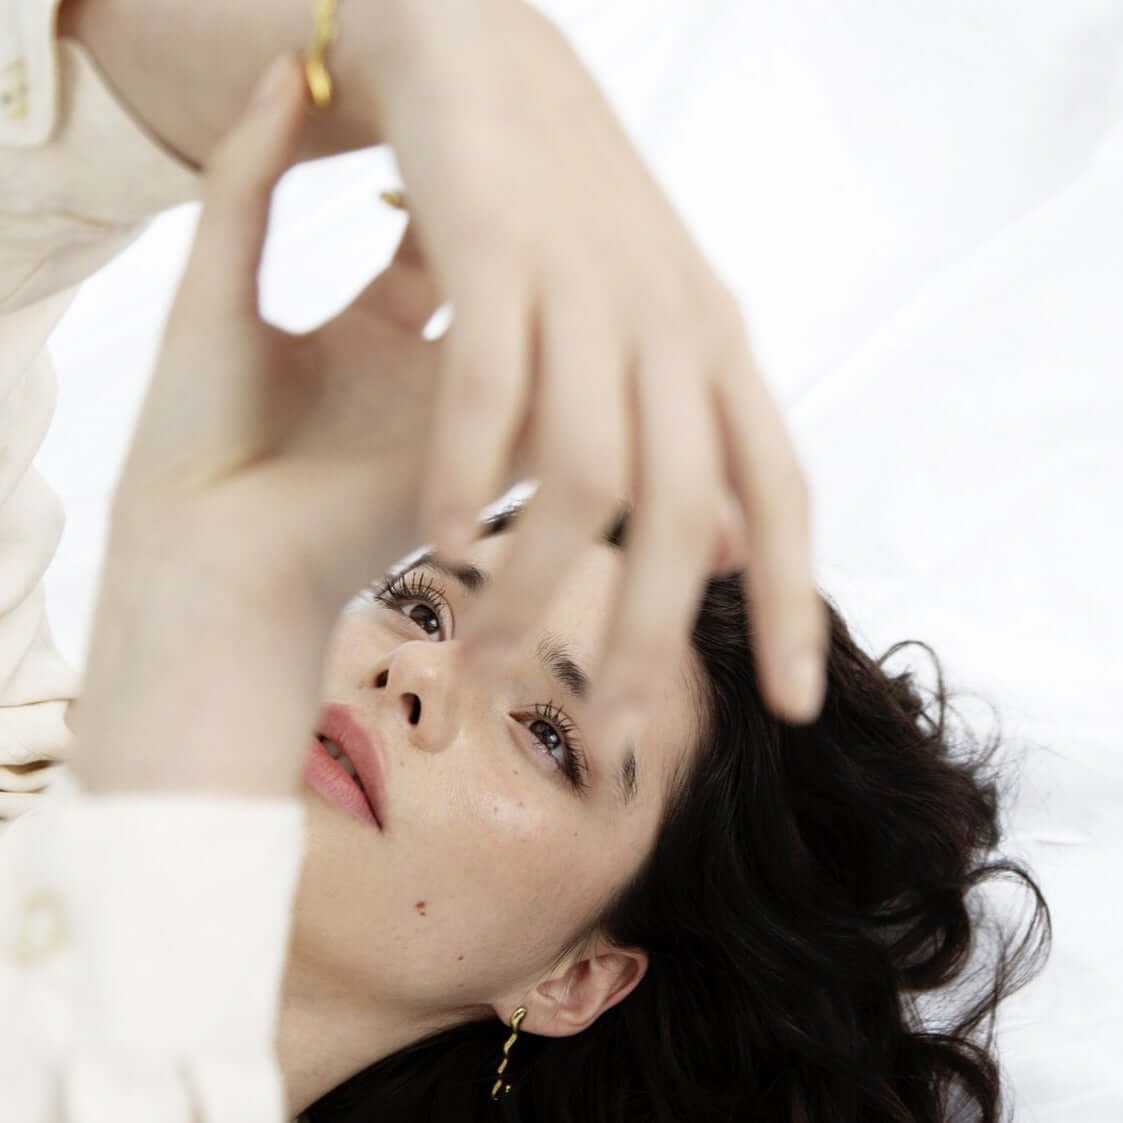 Woman lying on the floor, playing with her bracelet. Wearing white blouse and jewelry